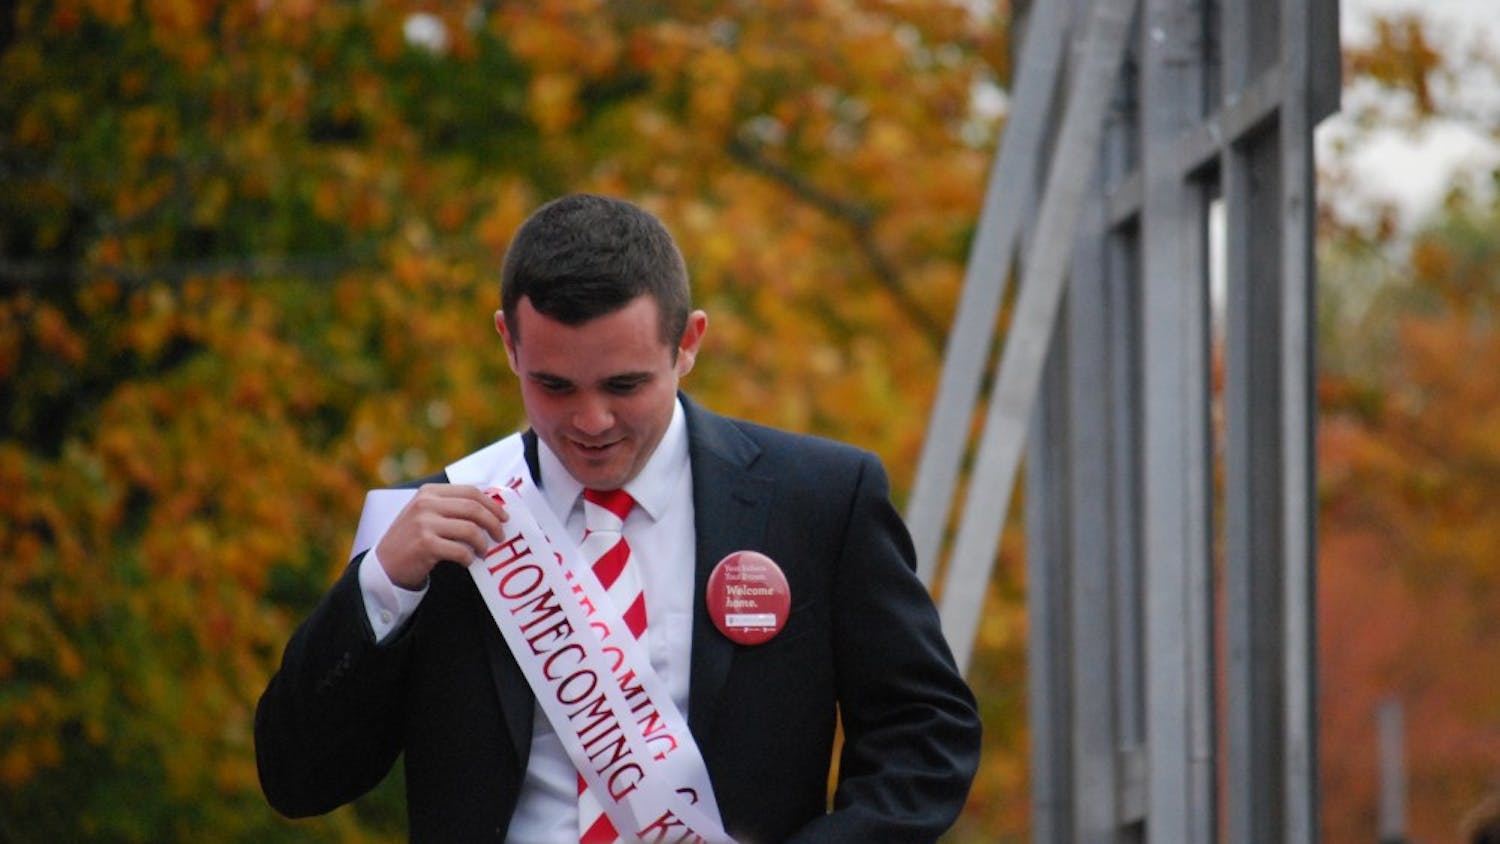 Senior Matt Renie walks off stage after being announced as Homecoming King.